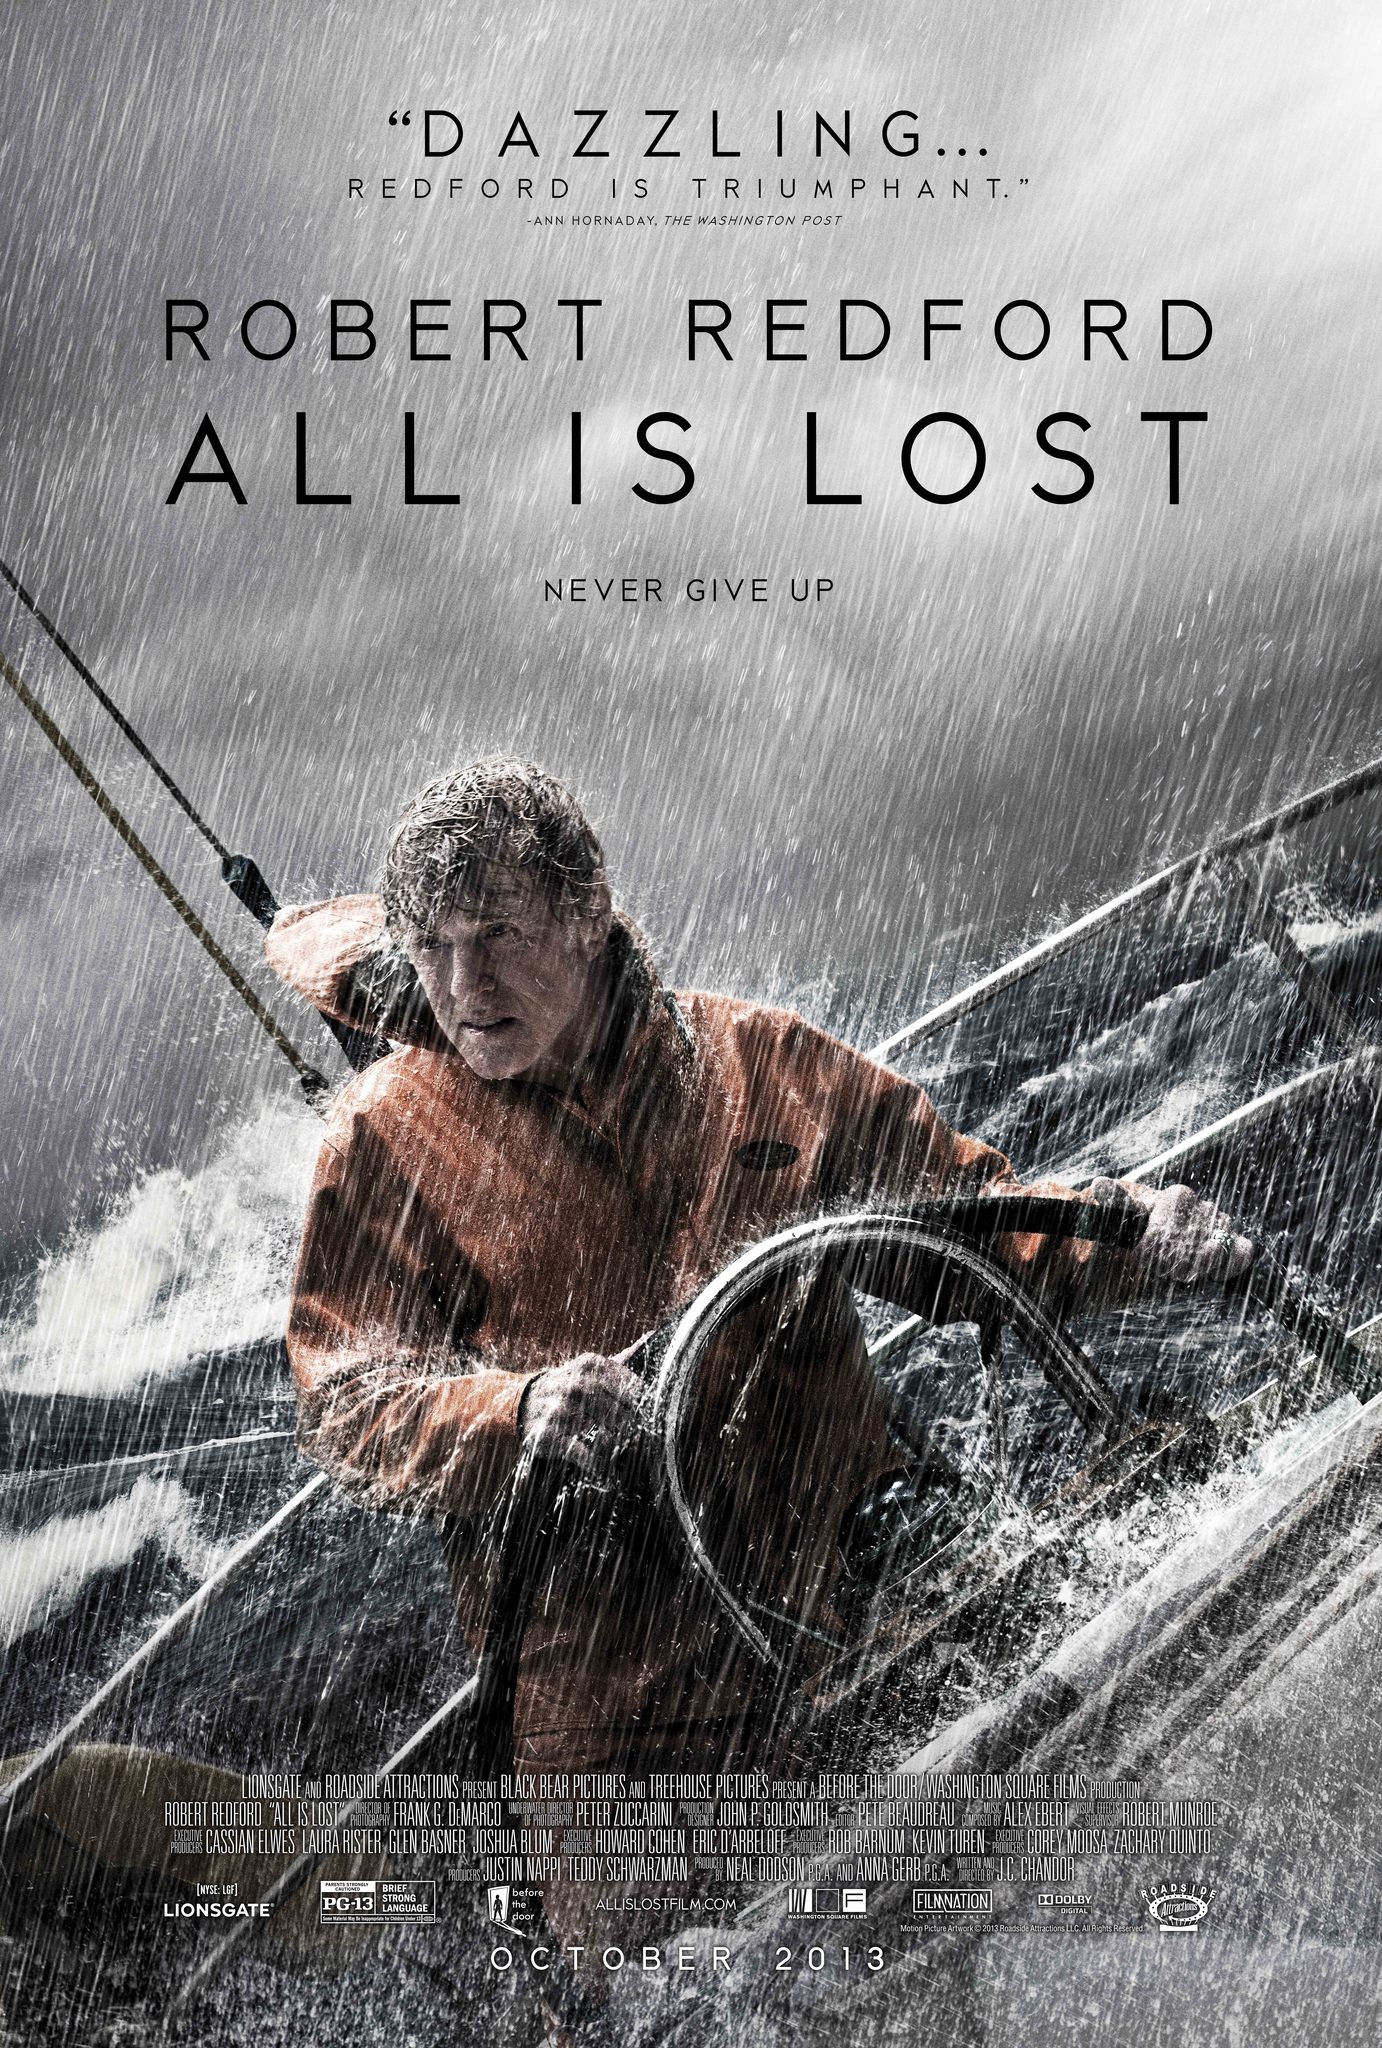 All Is Lost (2013) ★★★★☆